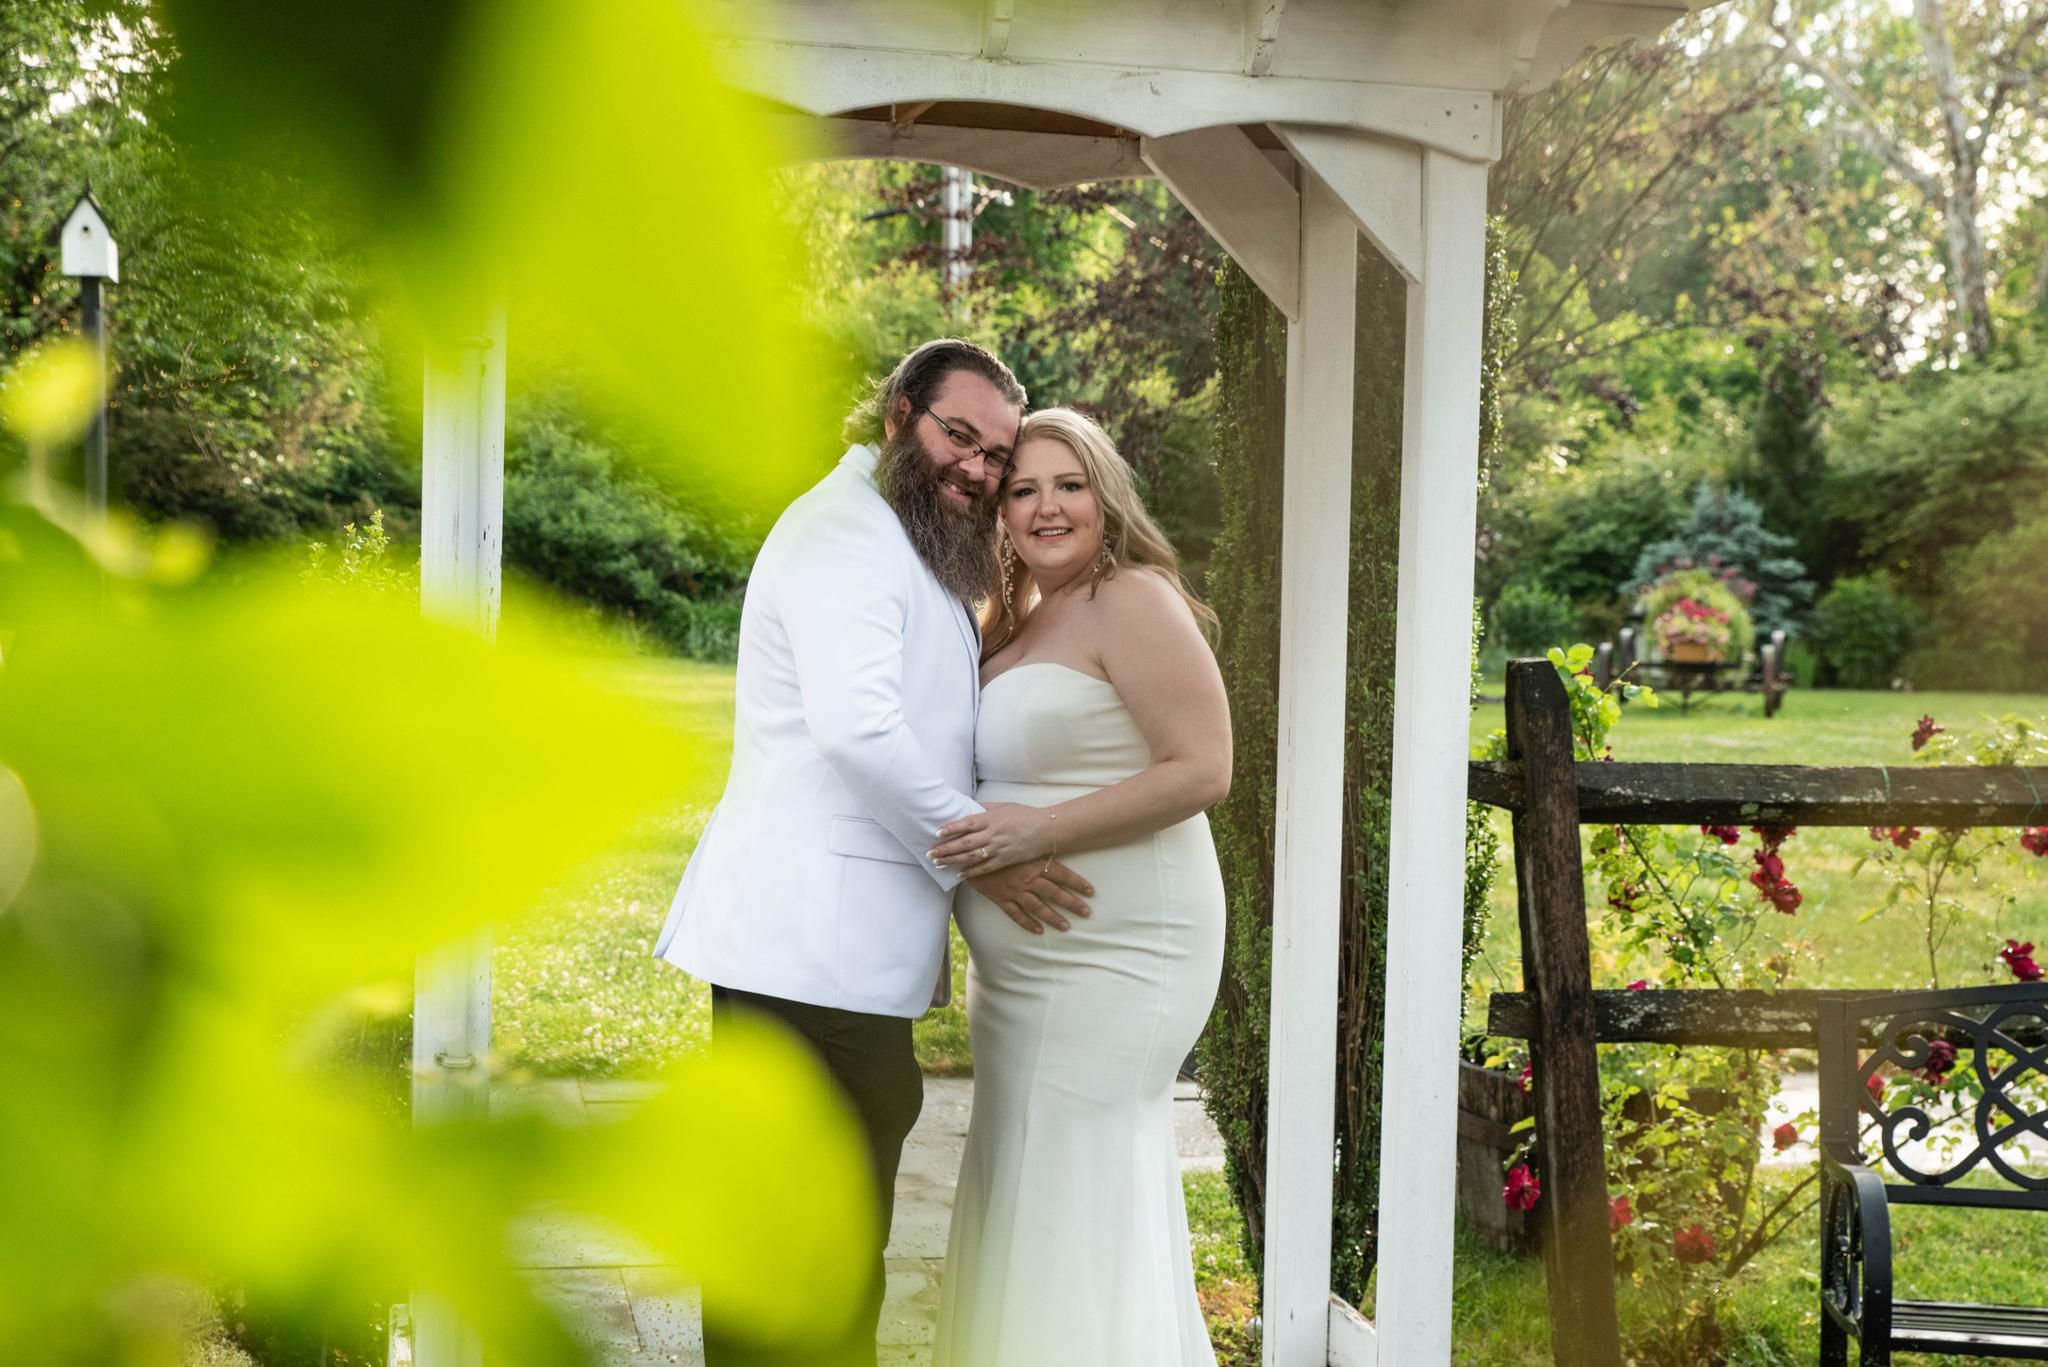 A Perfect Day at The Barn at Boone Dam: Kayla and Sean’s Wedding